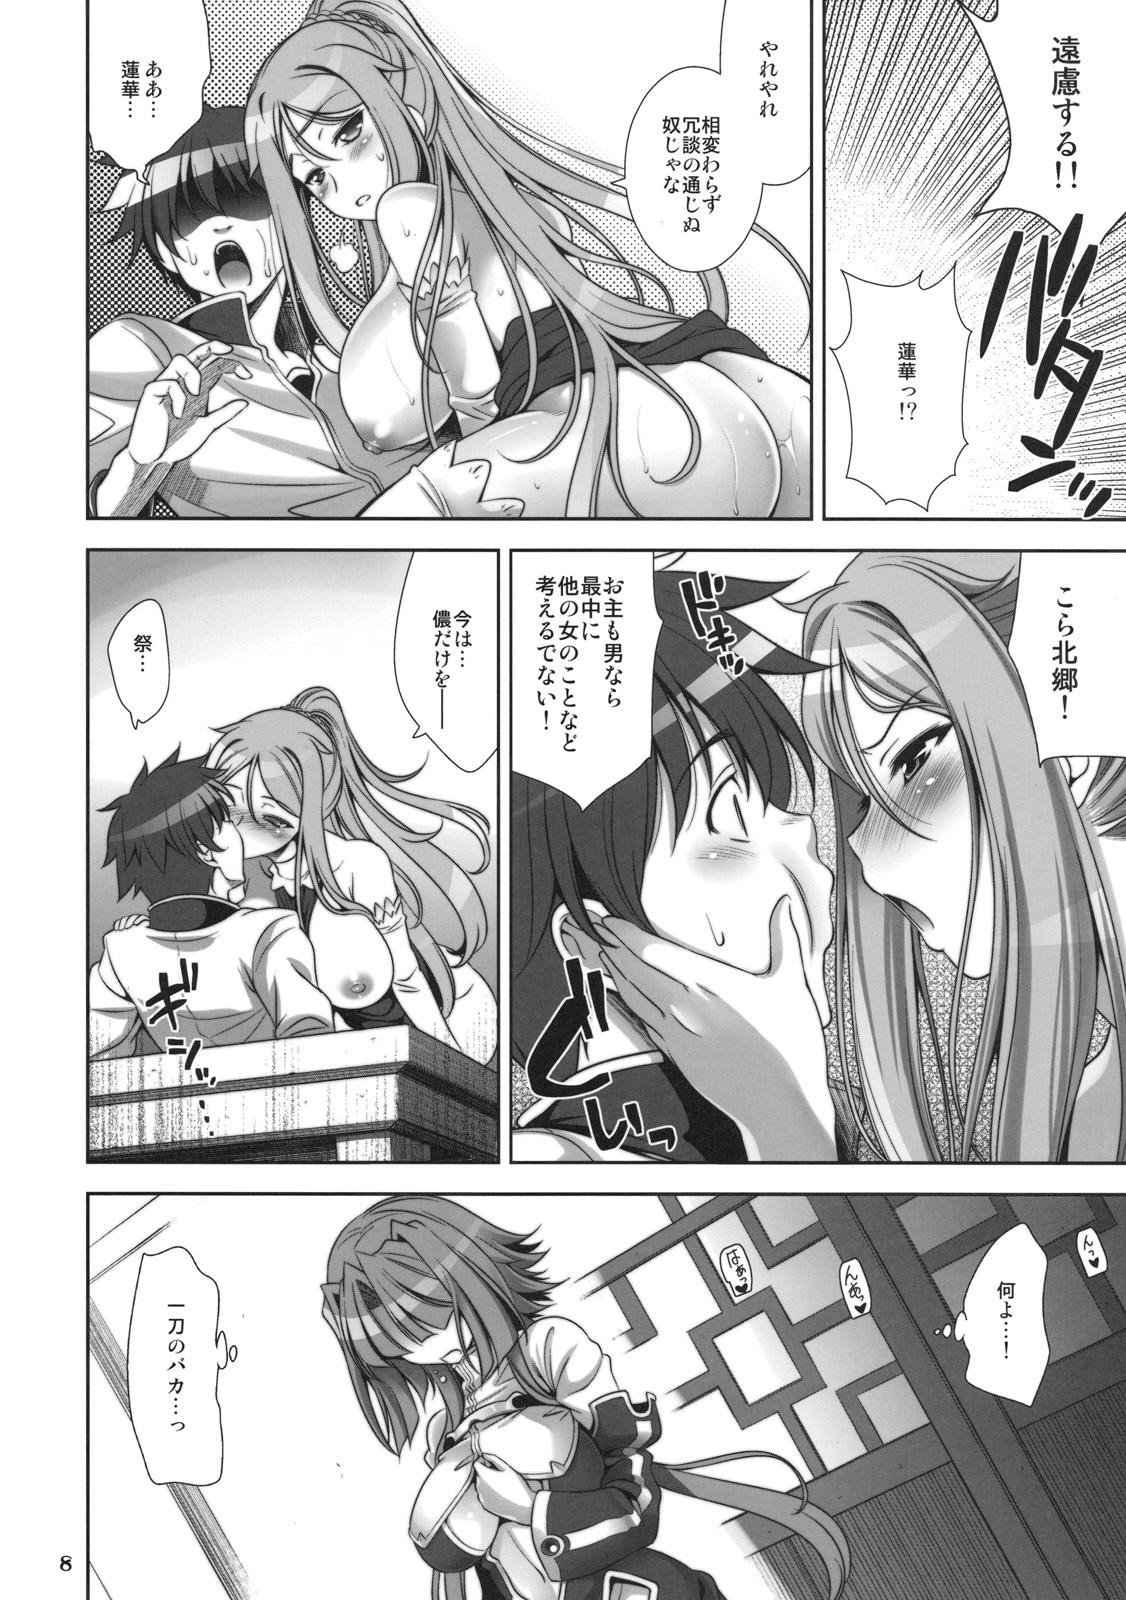 Eating Go! My Way - Koihime musou Cumload - Page 7